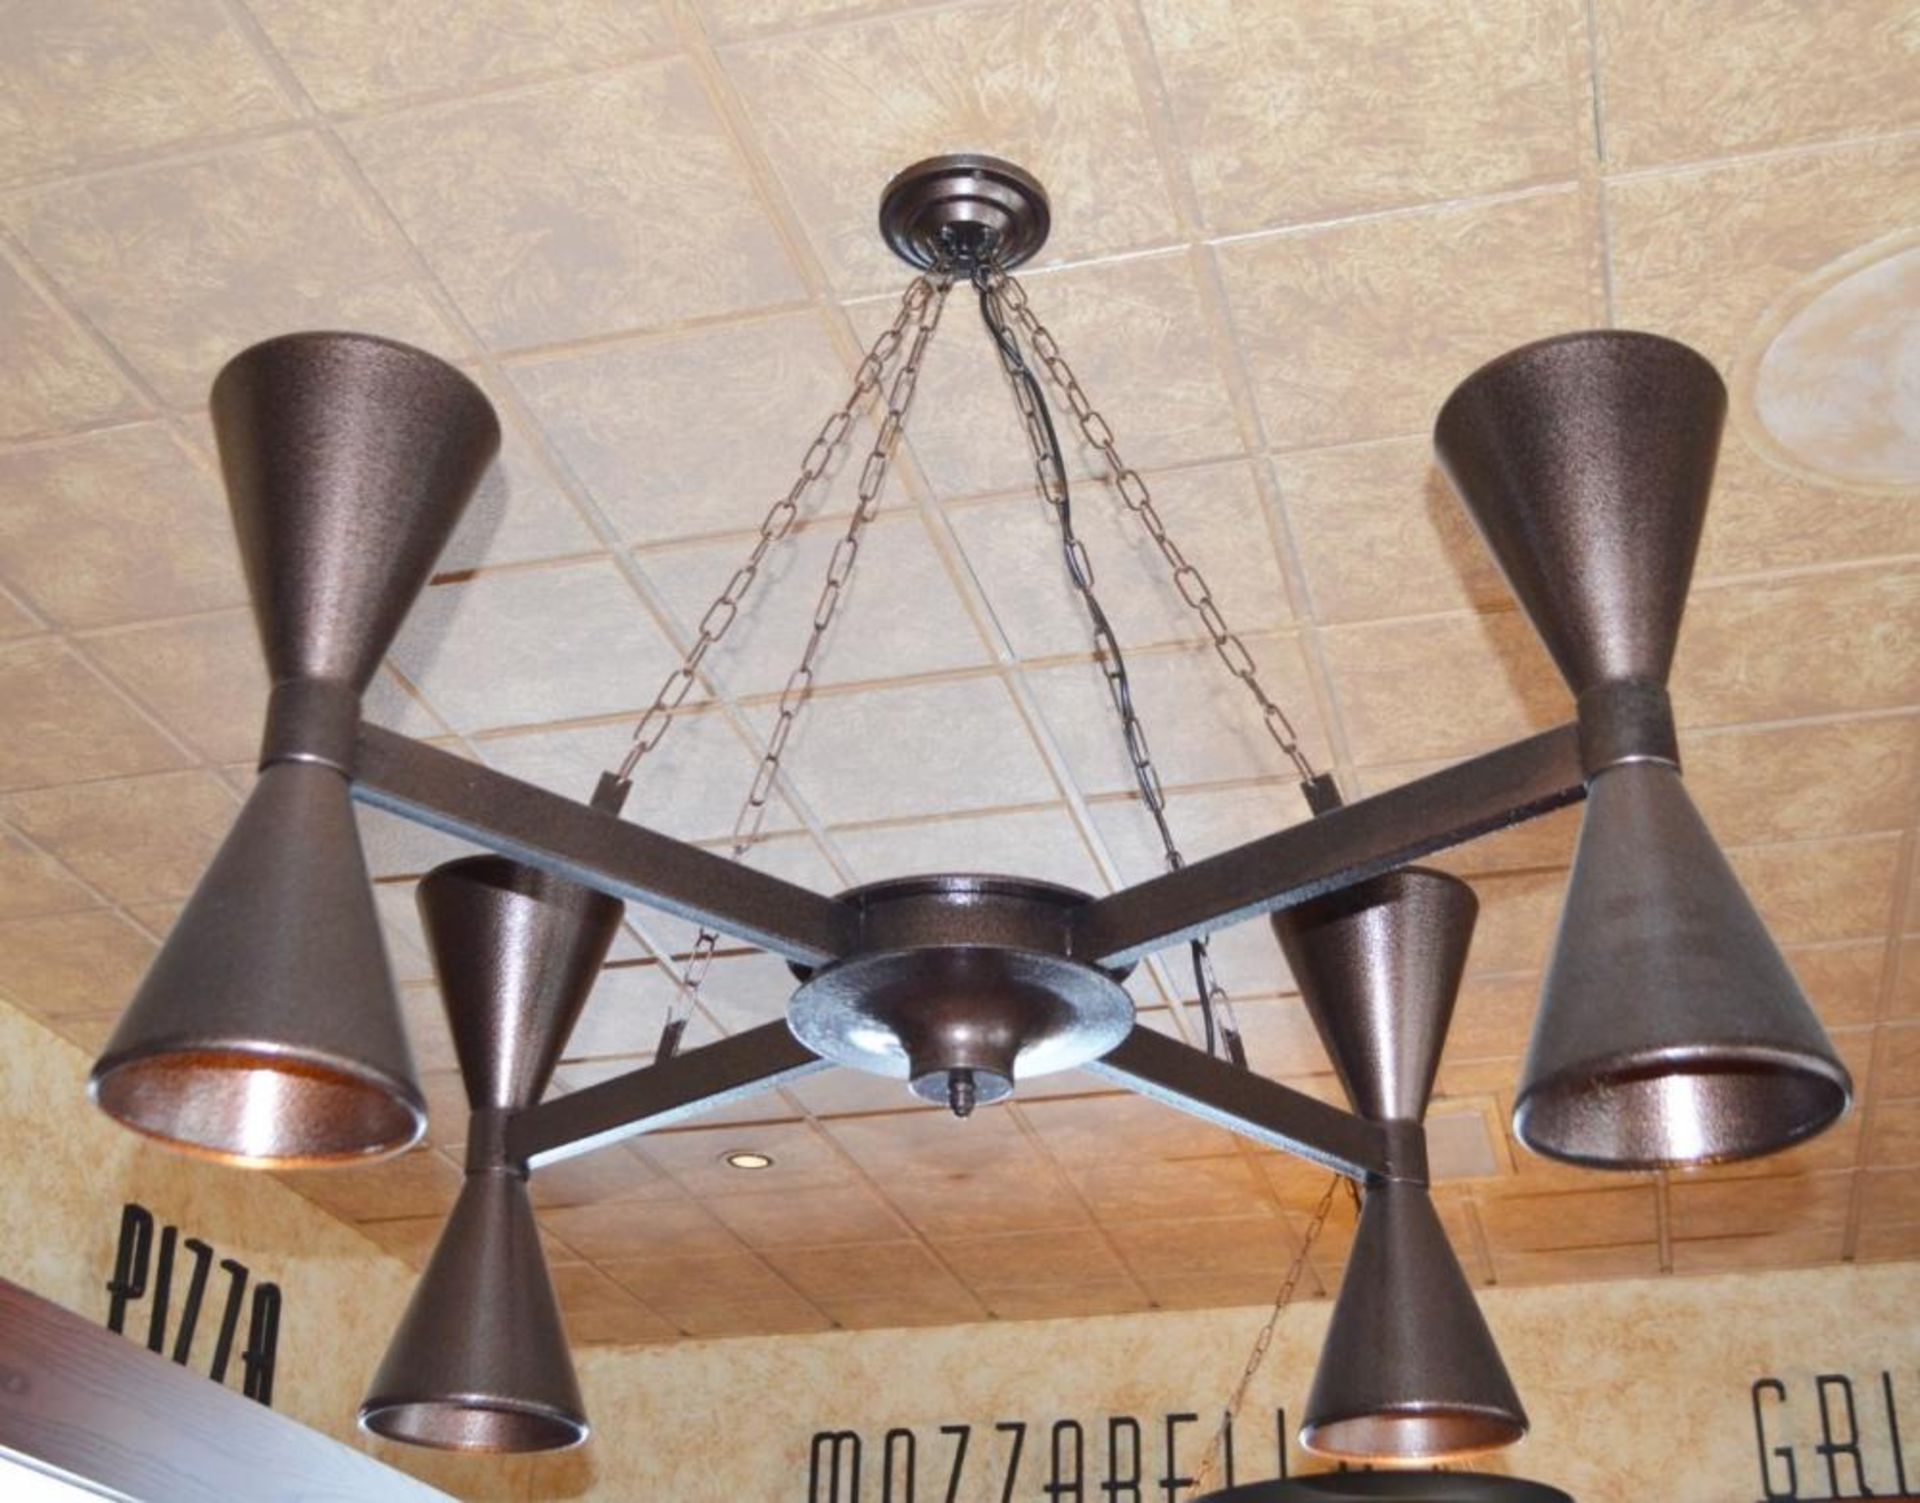 2 x Impressive 4 Arm Chandelier Light Fittings With Brown Pitted Finish - Pair of - Approx Dimension